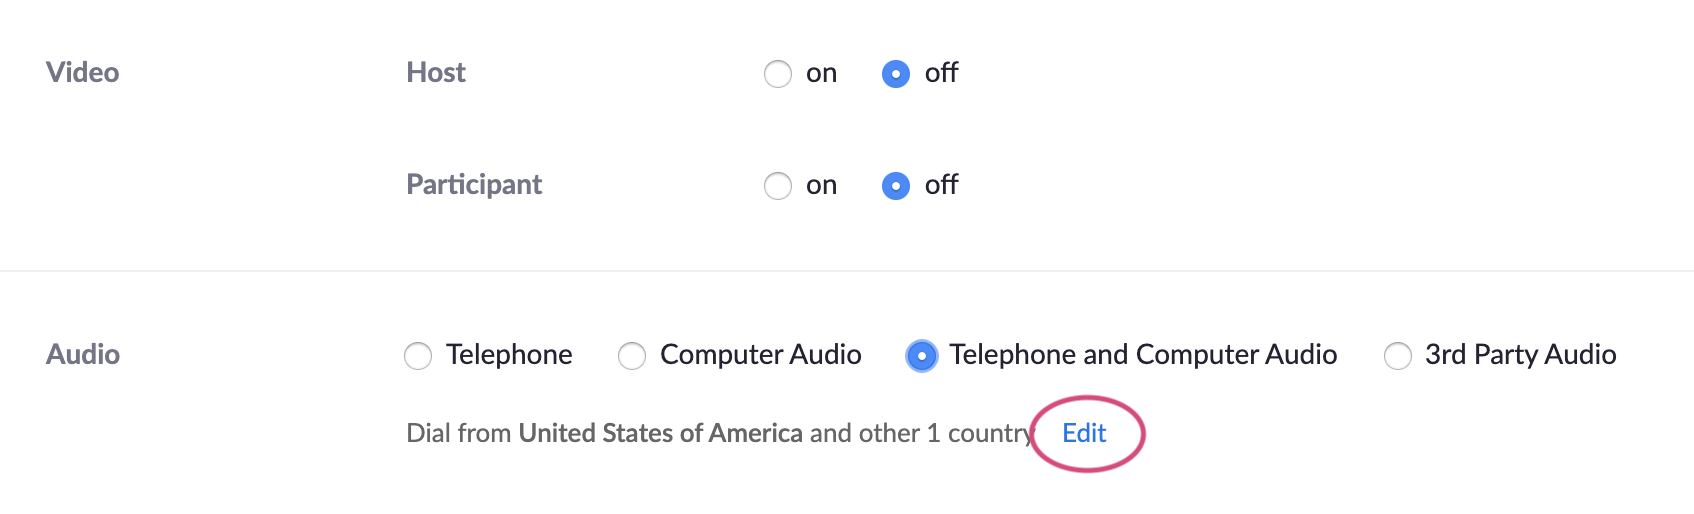 A screenshot of the settings when scheduling a new Zoom meeting. The option to 'Edit' which countries participants can dial in from is emphasized.